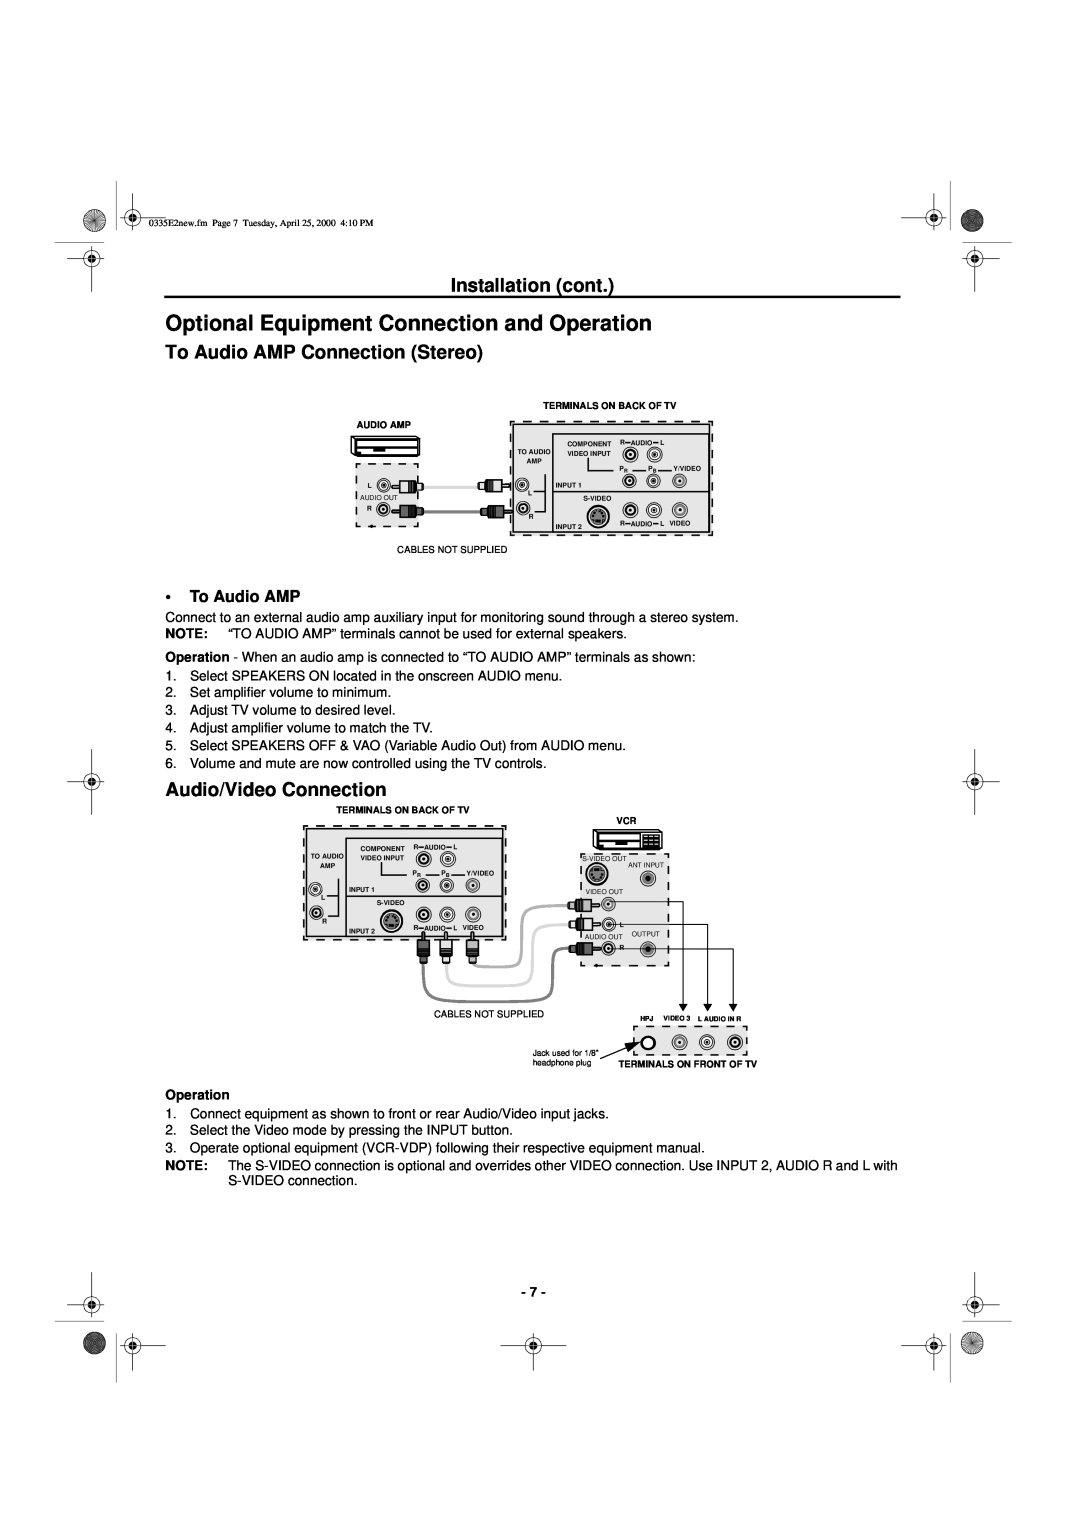 Hitachi 27GX01B manual Optional Equipment Connection and Operation, To Audio AMP 